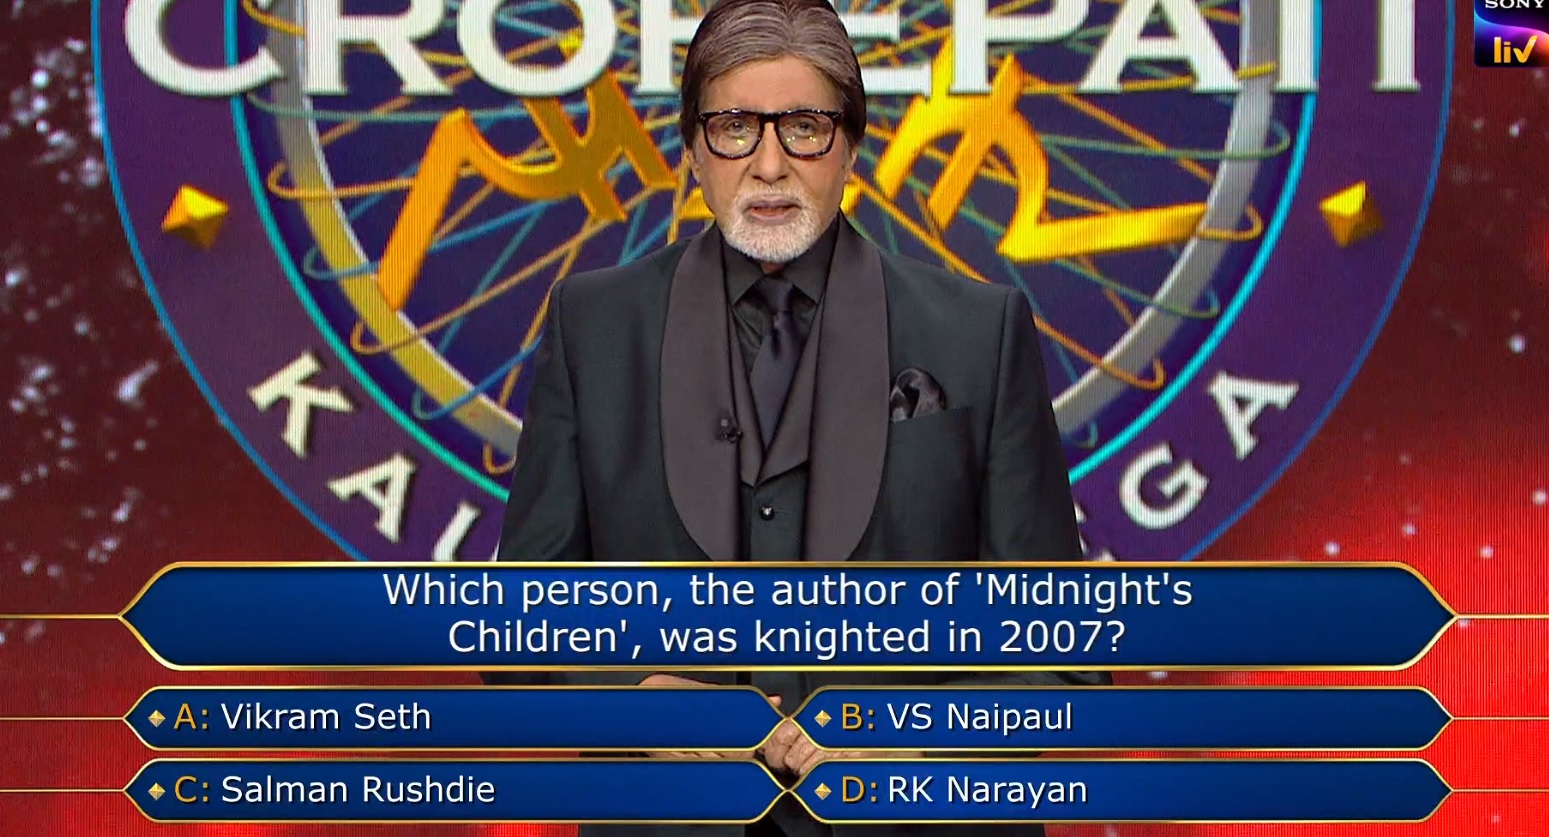 Ques : Which person, the author of ‘Midnight’s Children’, was knighted in 2007?